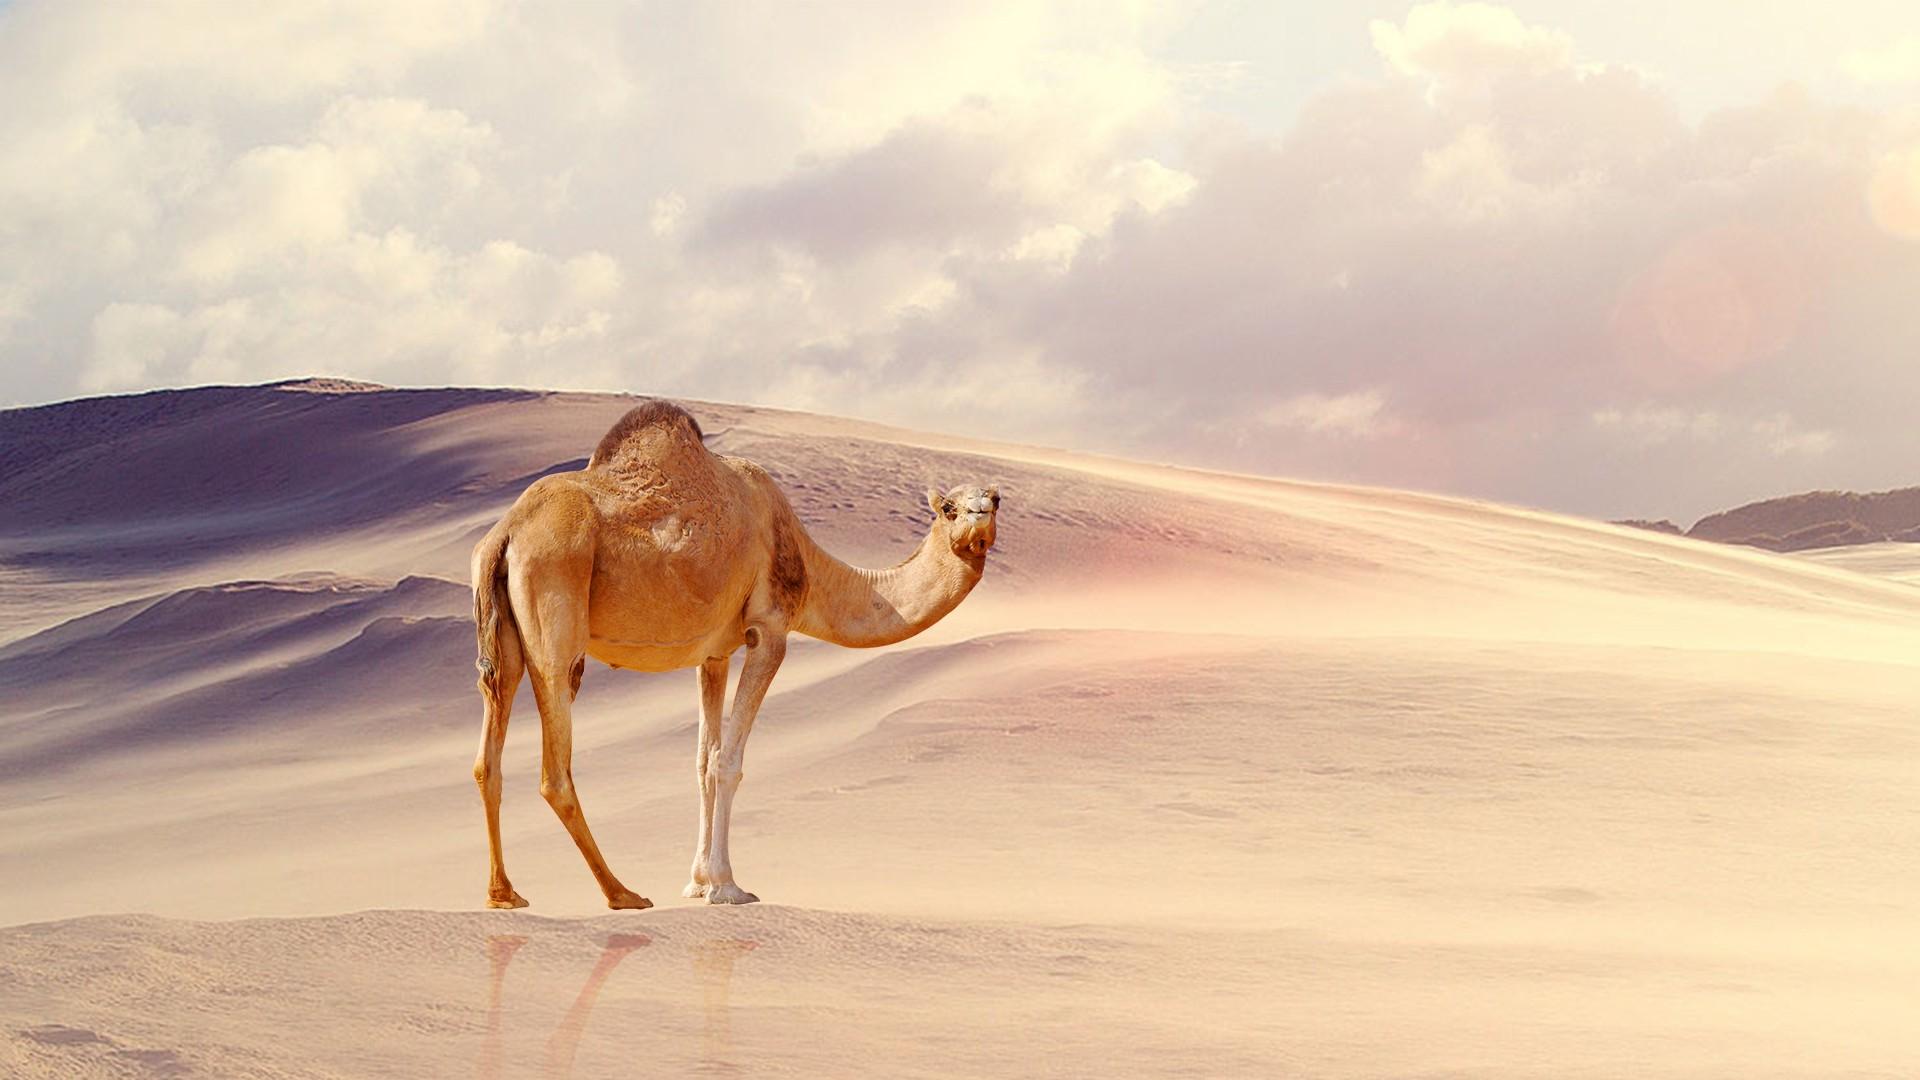 Camel Wallpapers 2K Backgrounds, Wallpaper, Pics, Photos Free Download